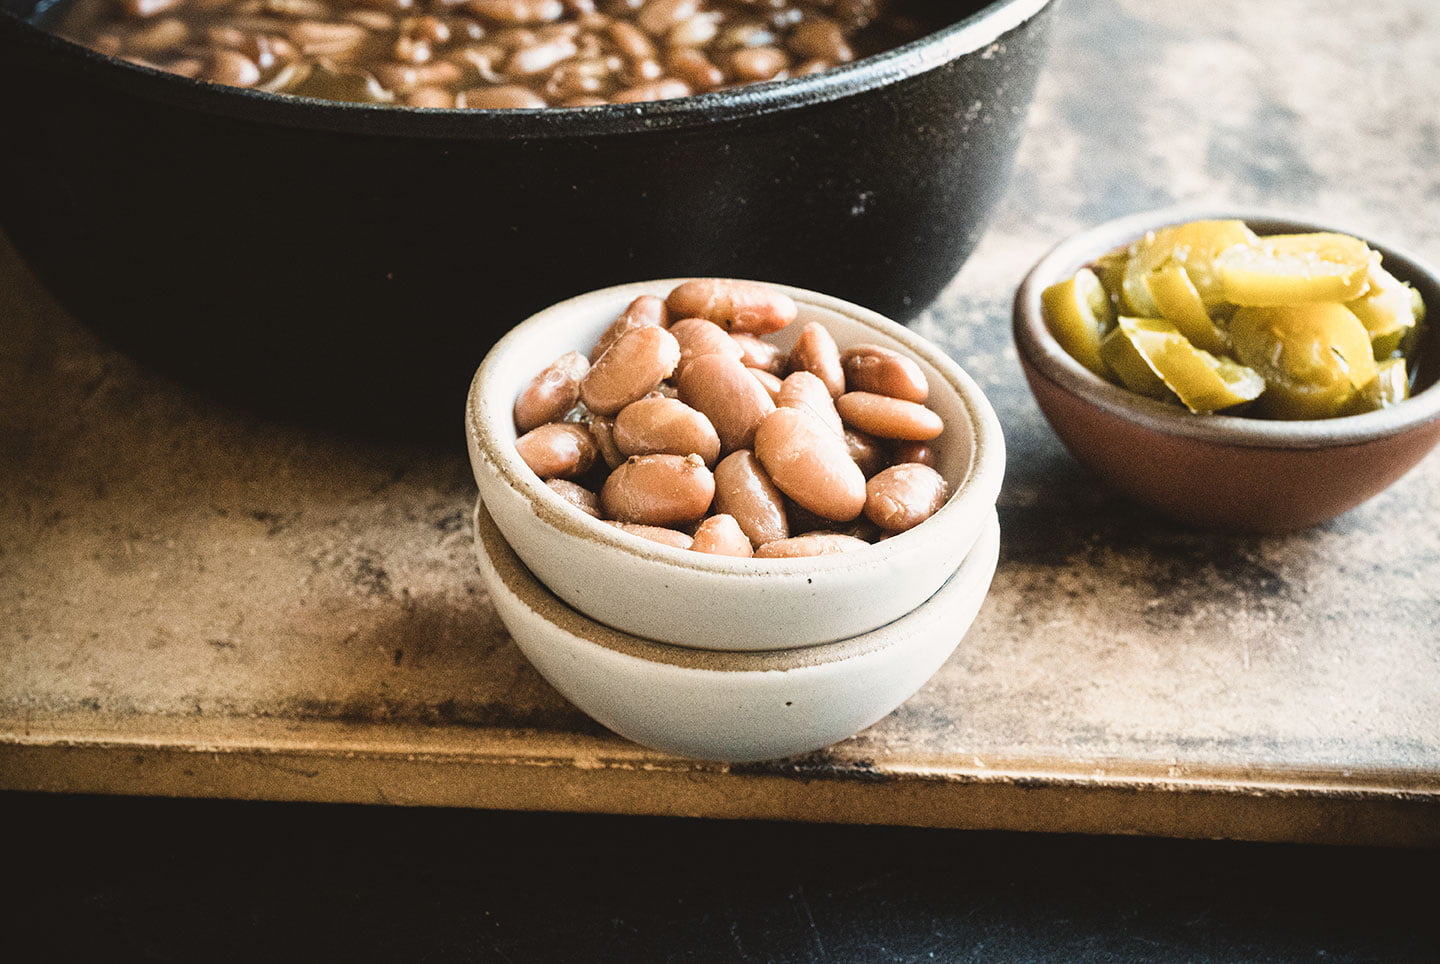 How to Soak Beans {Overnight & Quick Soak!} - Spend With Pennies